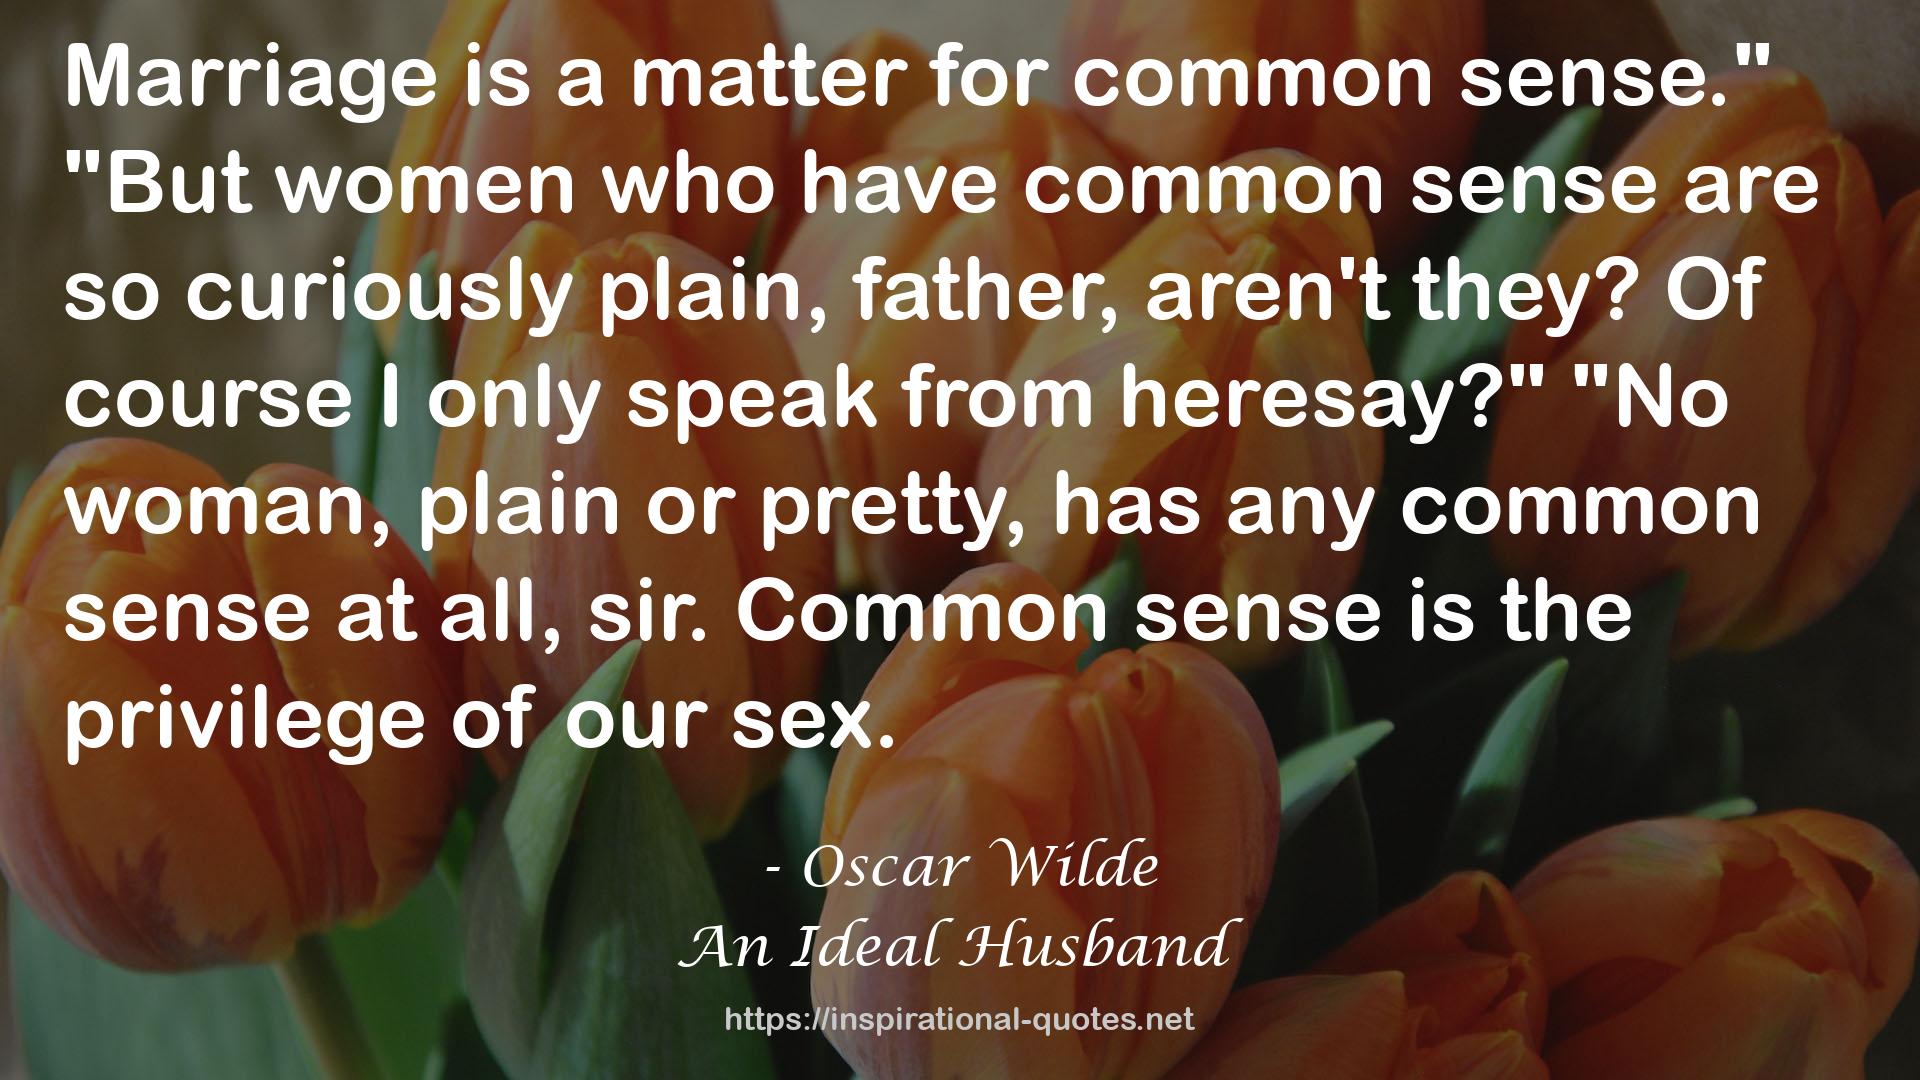 An Ideal Husband QUOTES